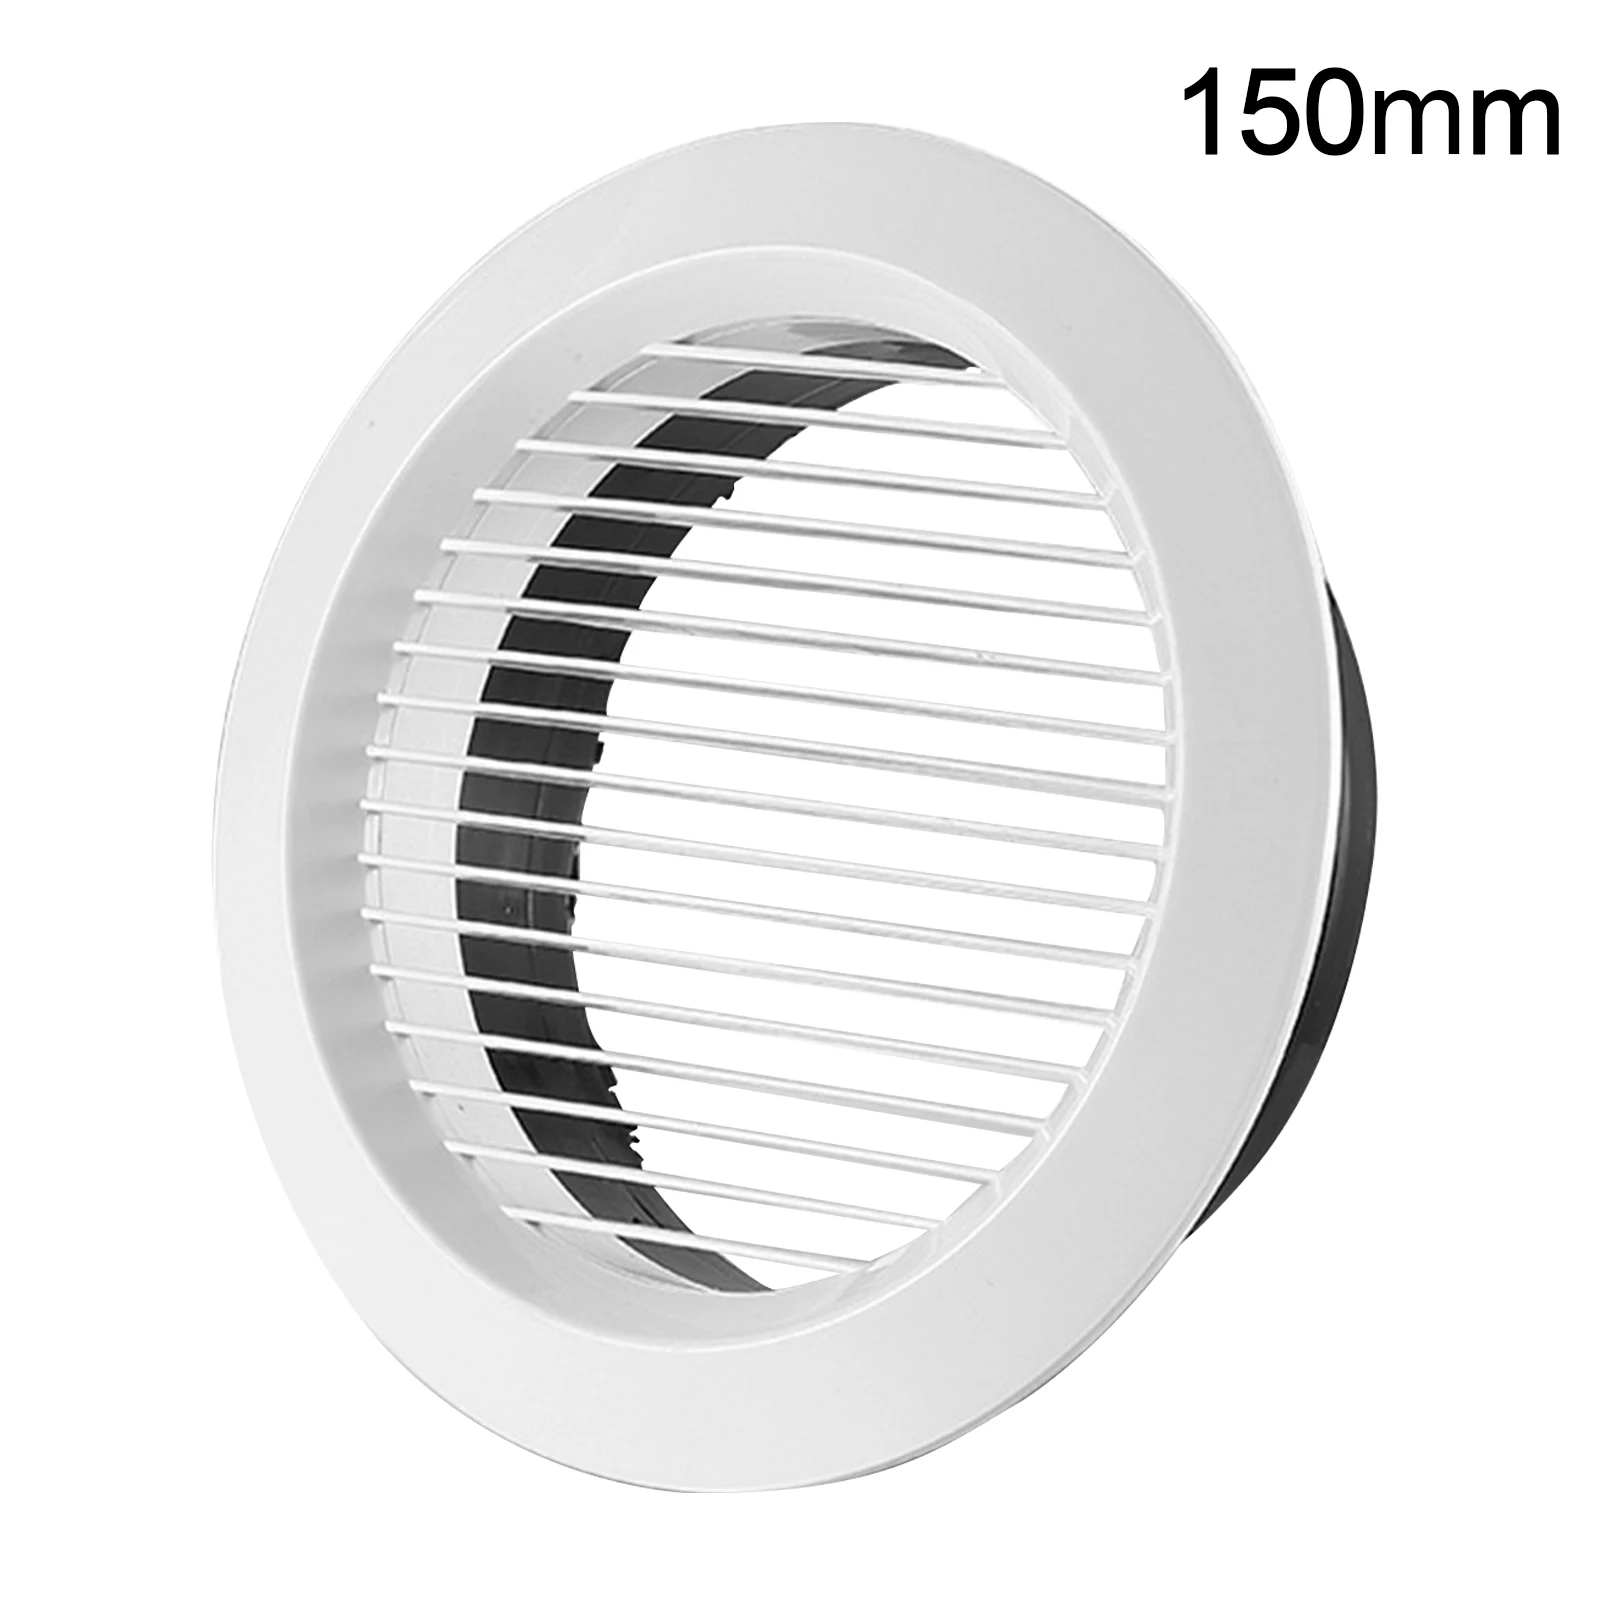 

Wall Anti Fly Ventilation Cover Easy Install ABS Air Vent Grille Round Louvred Bathroom Non Slip Adjustable Bedroom Accessories